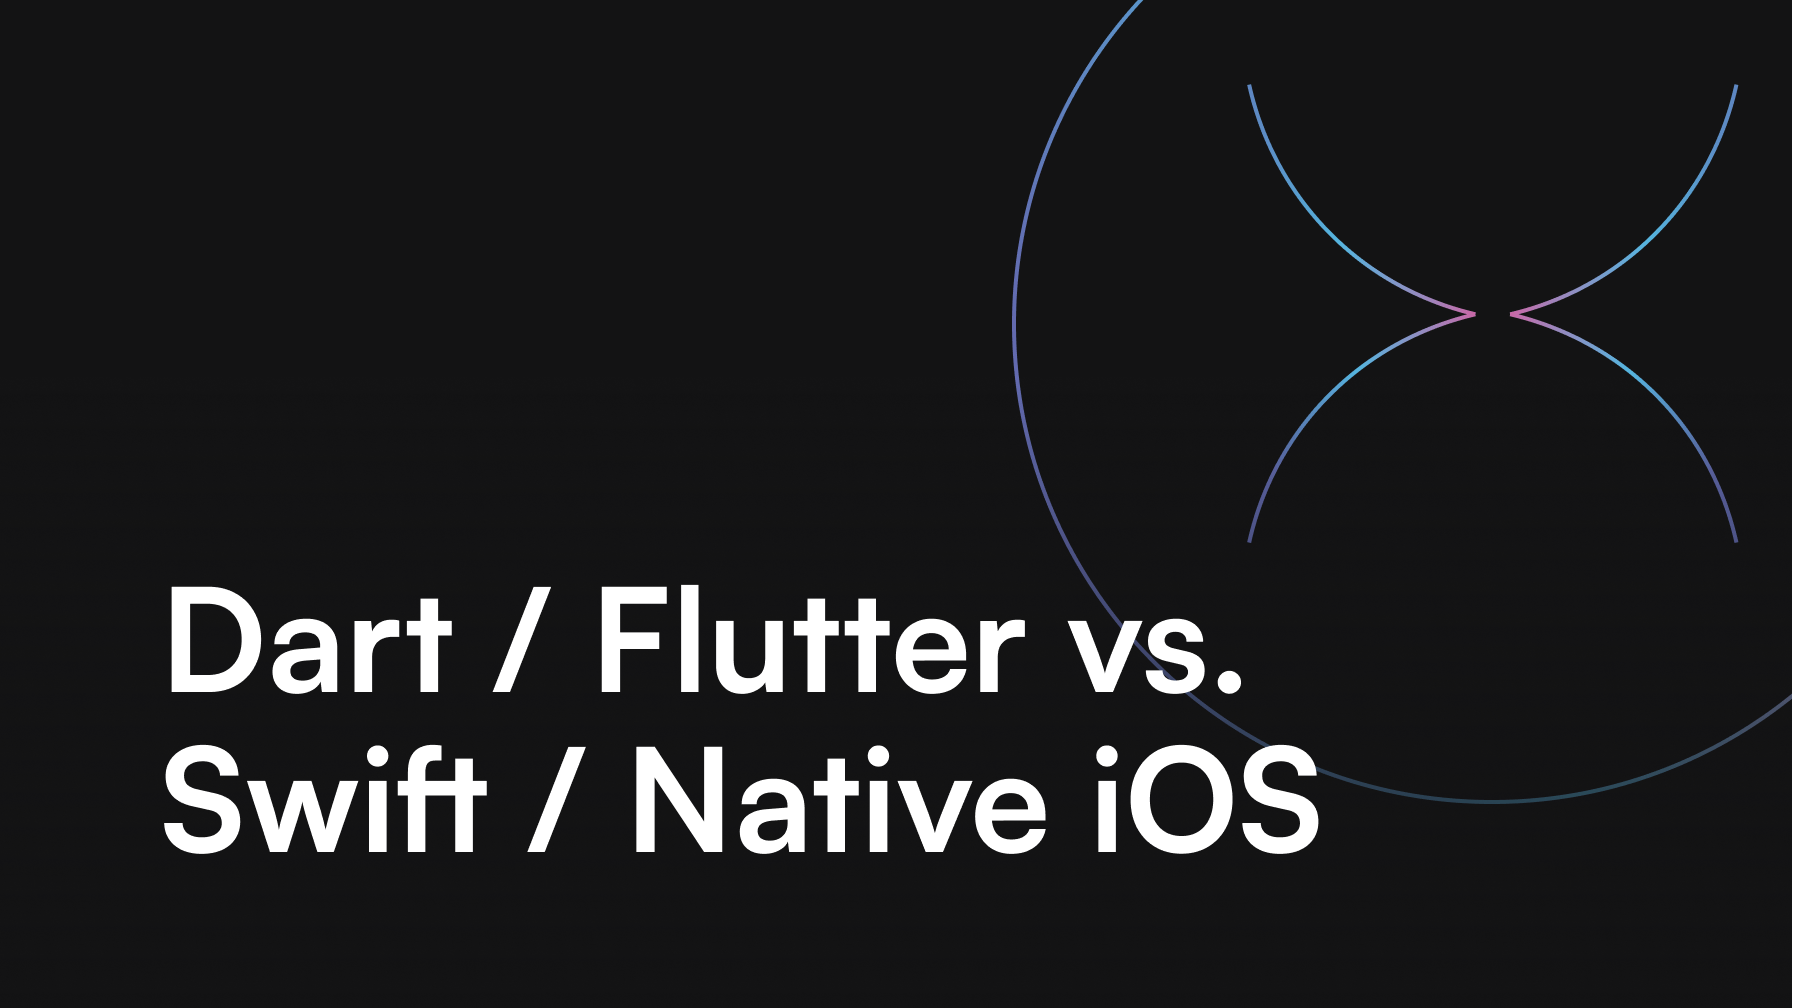 Dart / Flutter vs. Swift / Native iOS – which one is better in 2021?